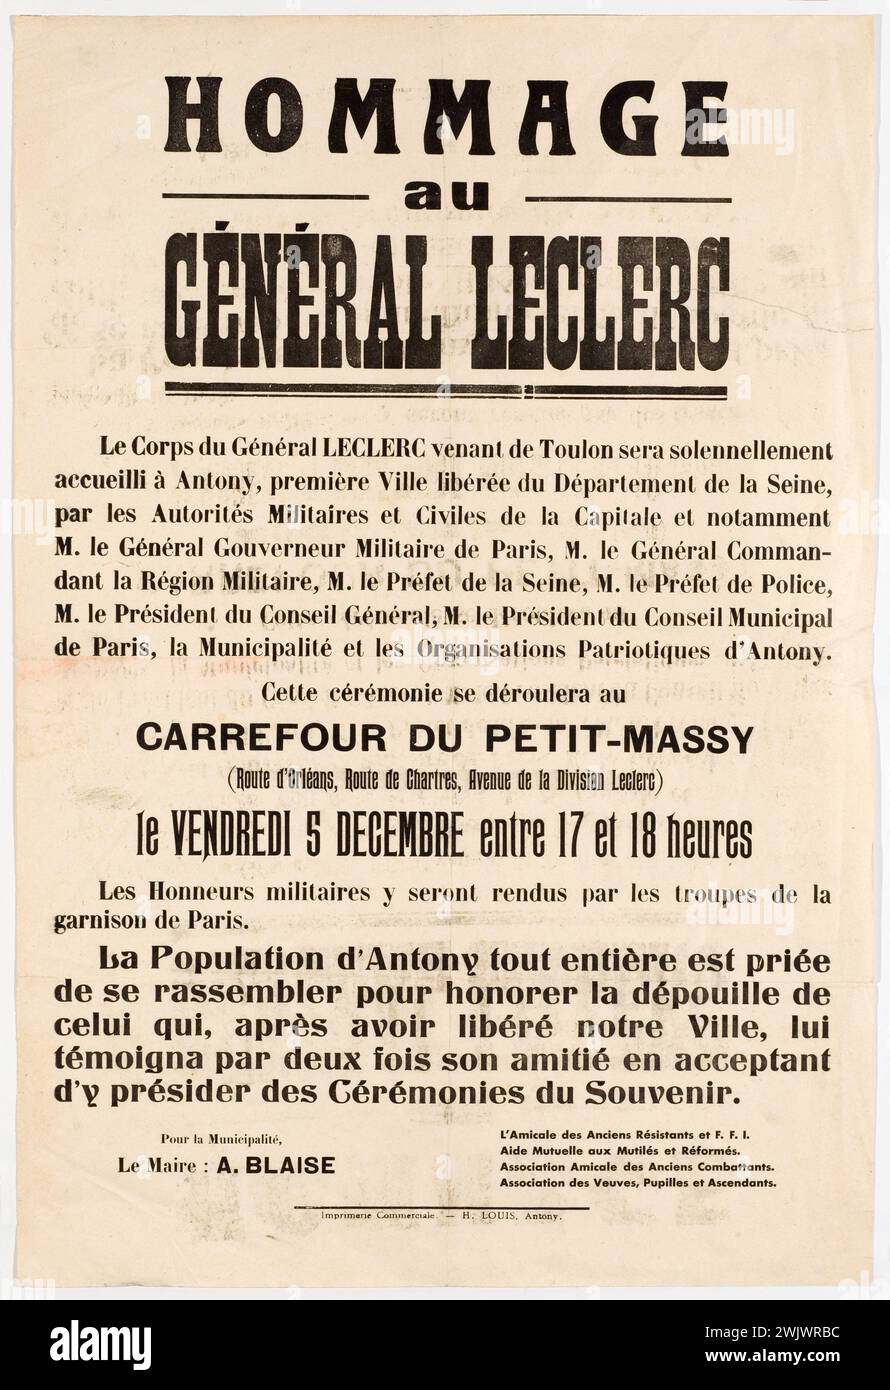 Tribute to General Leclerc ... This ceremony will take place at ... '. Commercial printing, H. Louis, Antony, 1947. Museum of General Leclerc de Hauteclocque and the Liberation of Paris, Jean Moulin Museum. Poster, Carrefour du Petit-Massy, Ceremonie Commemorative, Corps, General Francais, War 1939-1945, War 39-45, Héros, Homage, Commercial printing H. Louis, Liberation de Paris, Marechal de France, Second World War Stock Photo